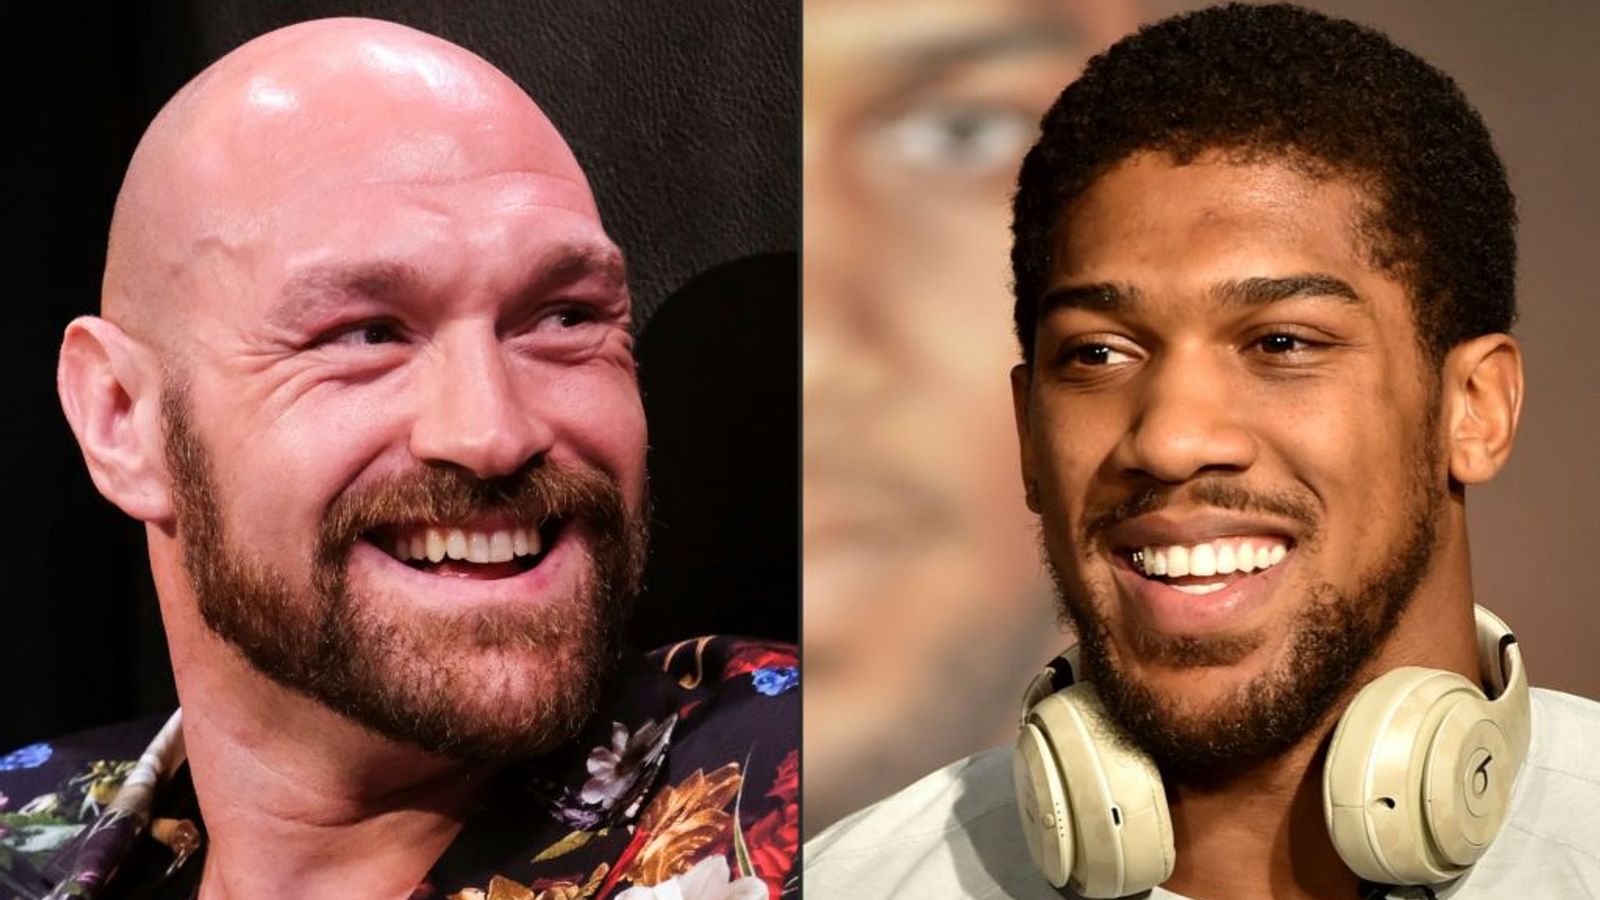 Anthony Joshua responds to Tyson Fury’s offer of British heavyweight clash, insisting he’ll be ‘ready in December’